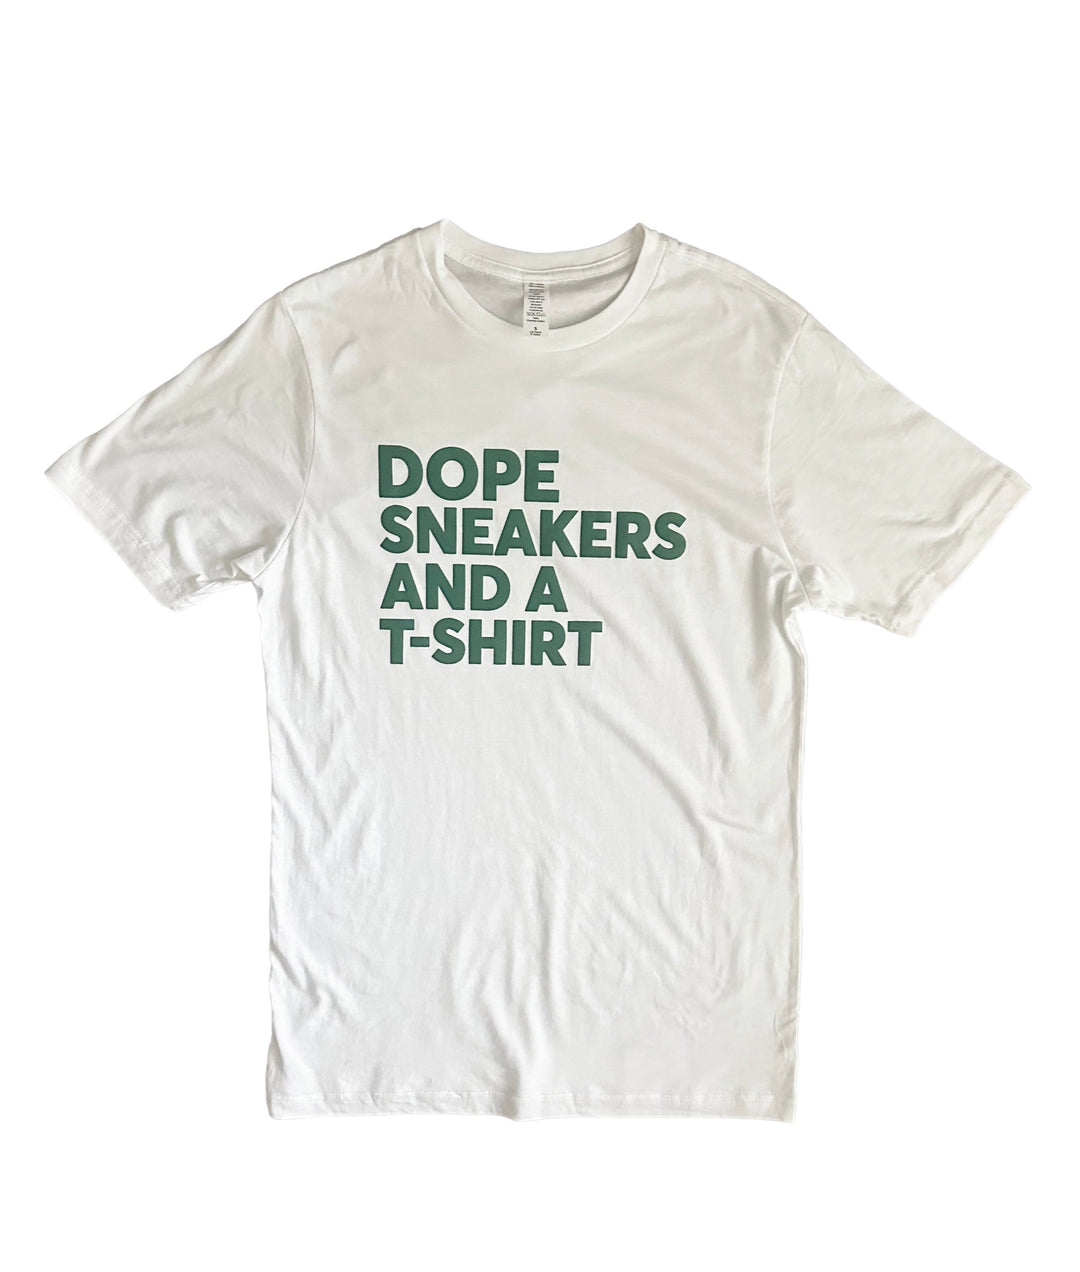 a white t - shirt that says dope sneakers and a t - shirt